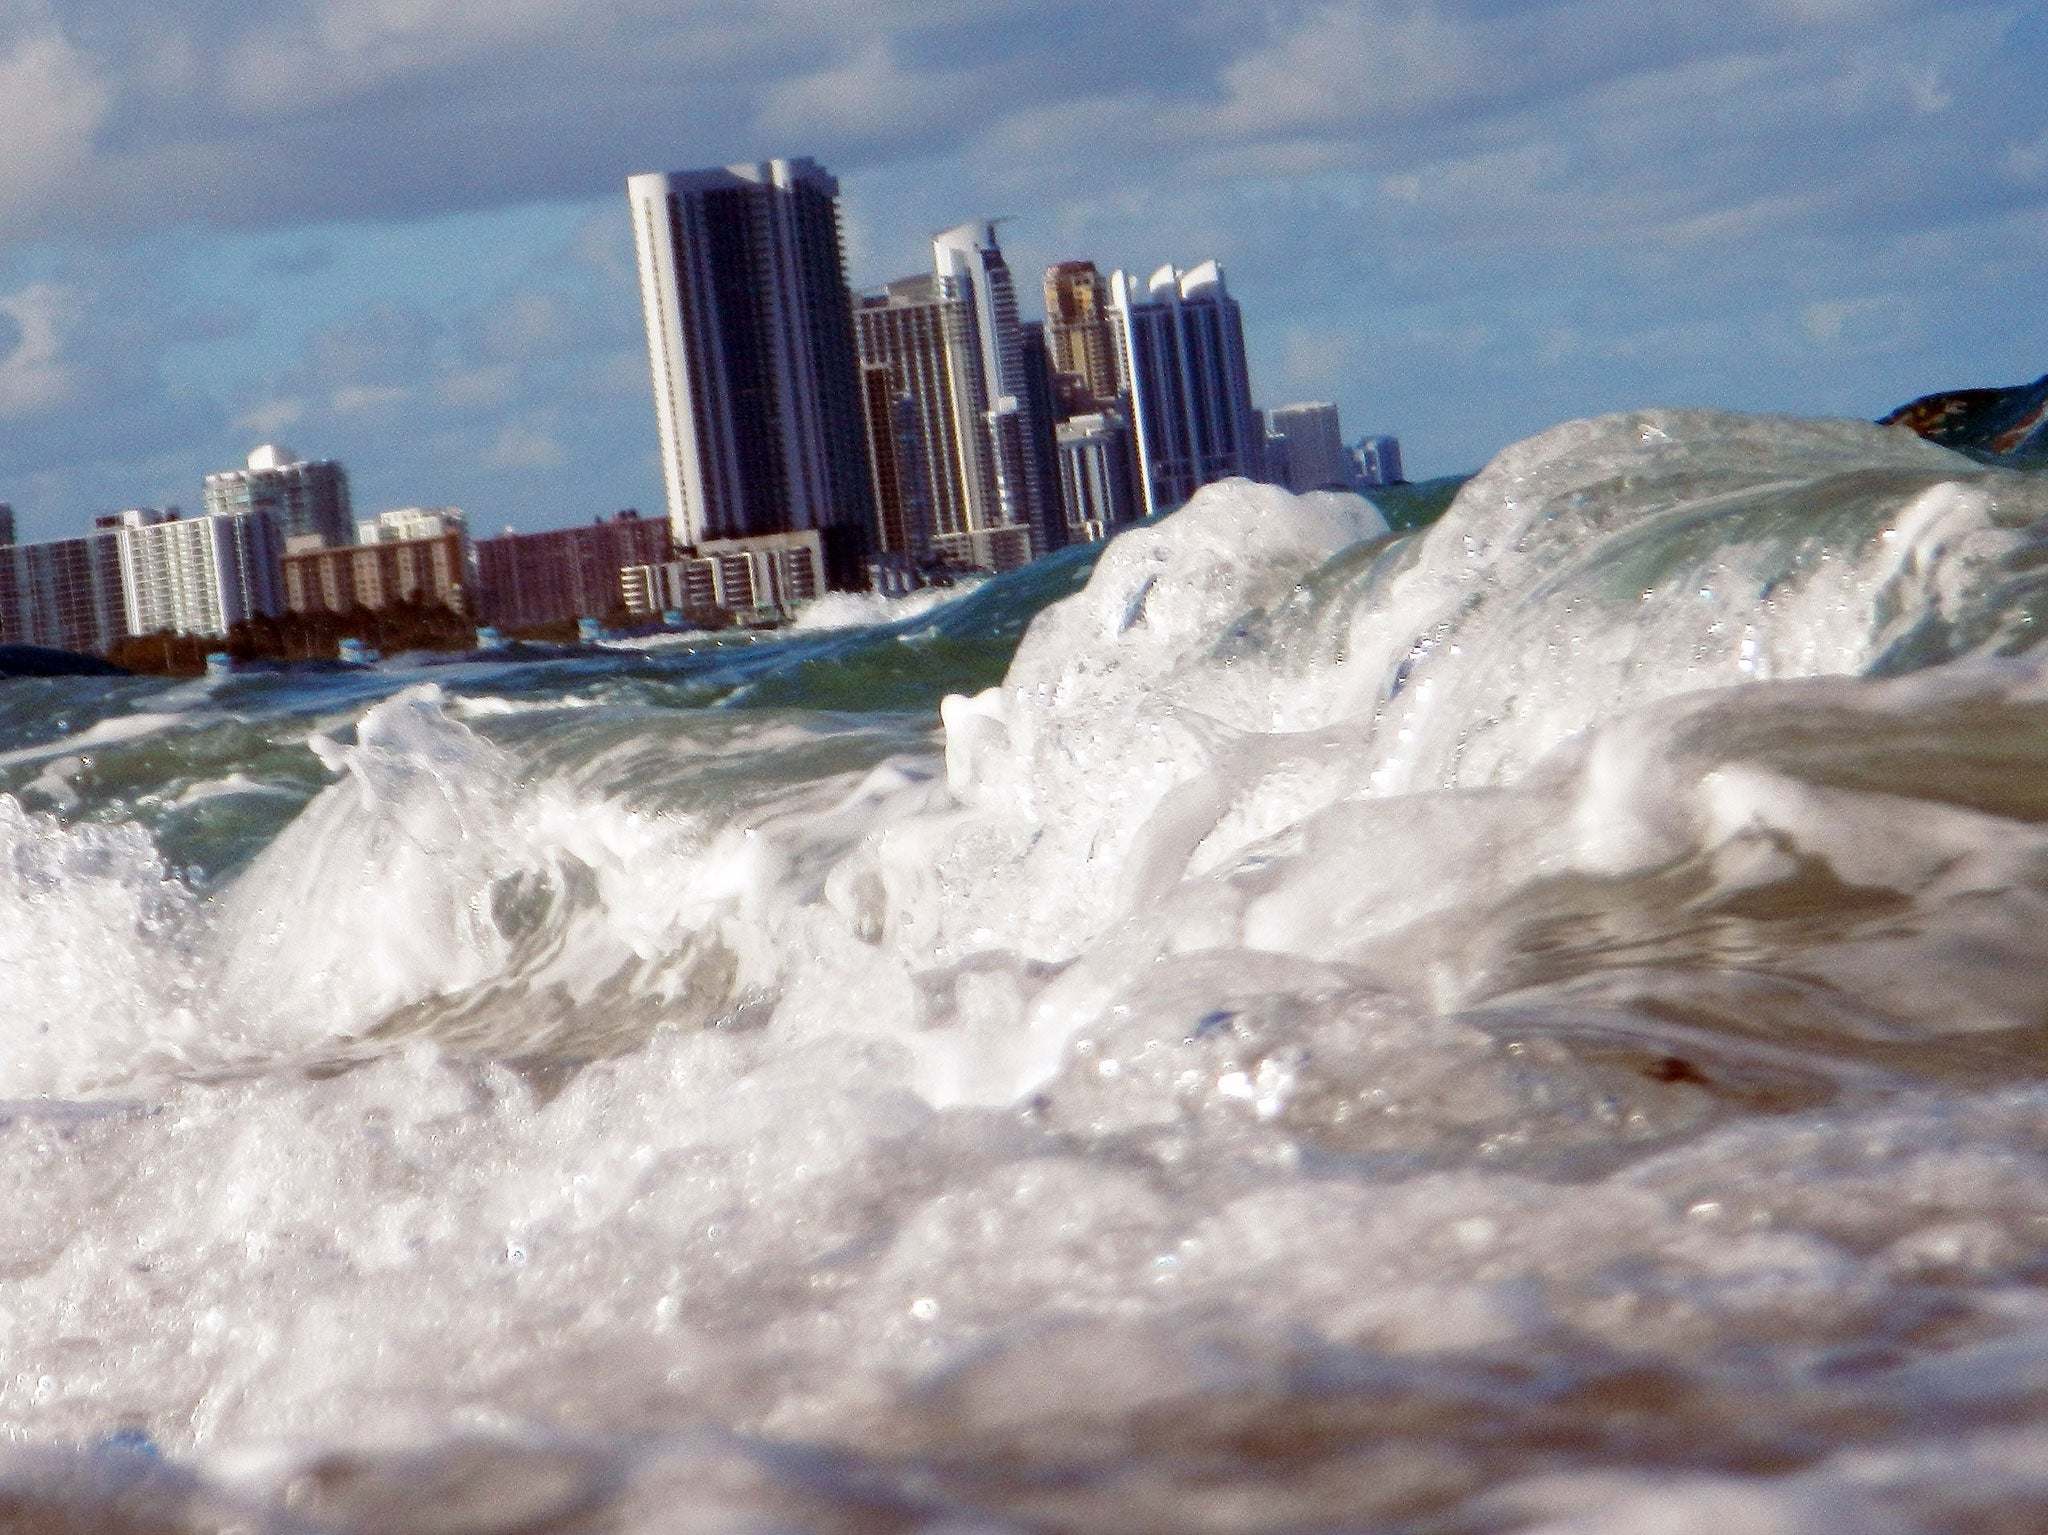 Buildings are seen near the ocean as reports indicate that Miami-Dade County in the future could be one of the most susceptible places when it comes to rising water levels due to global warming on March 14, 2012 in North Miami, Florida.